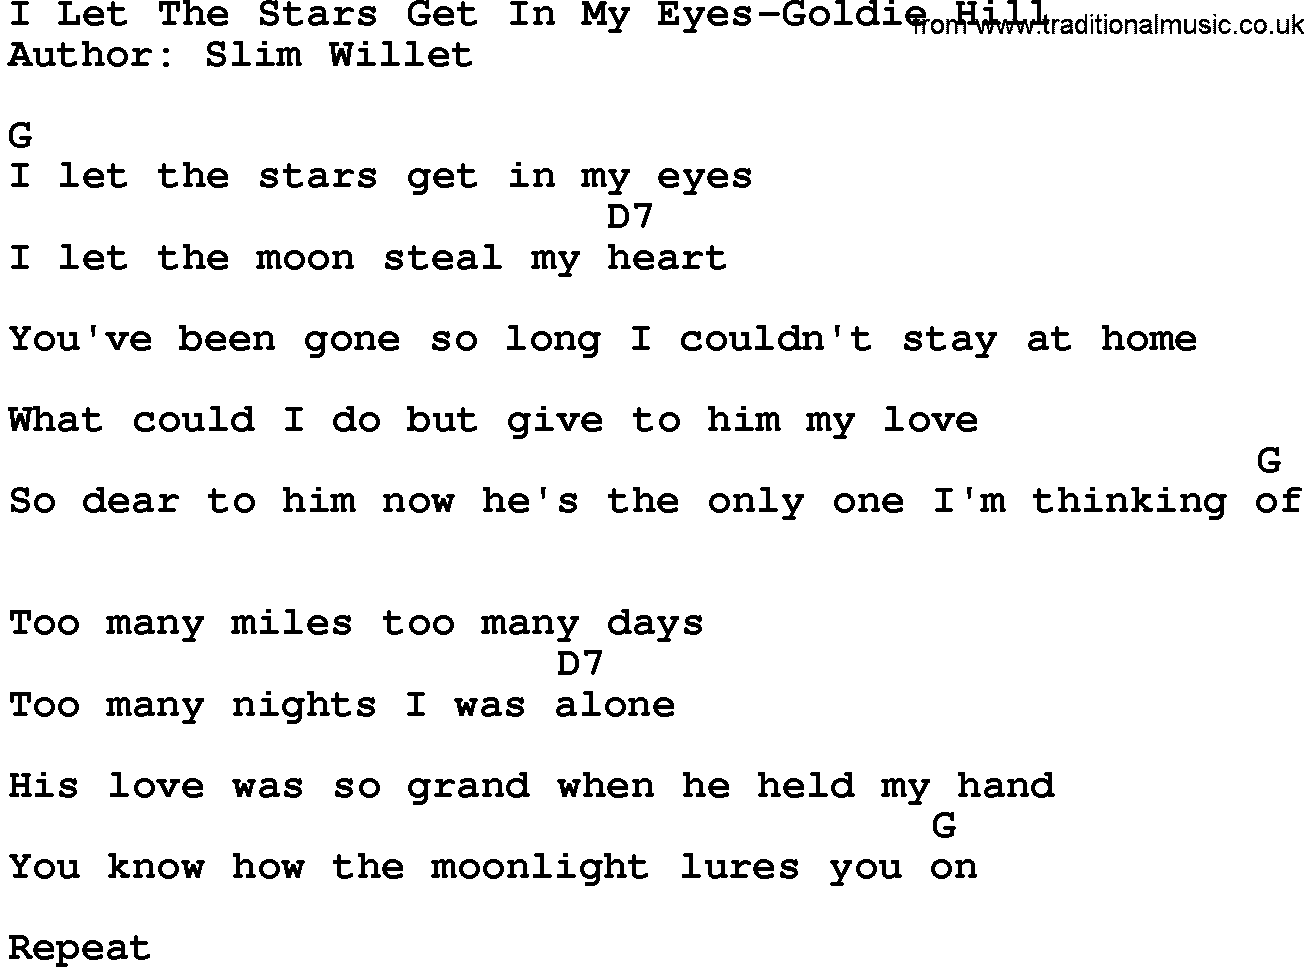 Country music song: I Let The Stars Get In My Eyes-Goldie Hill lyrics and chords